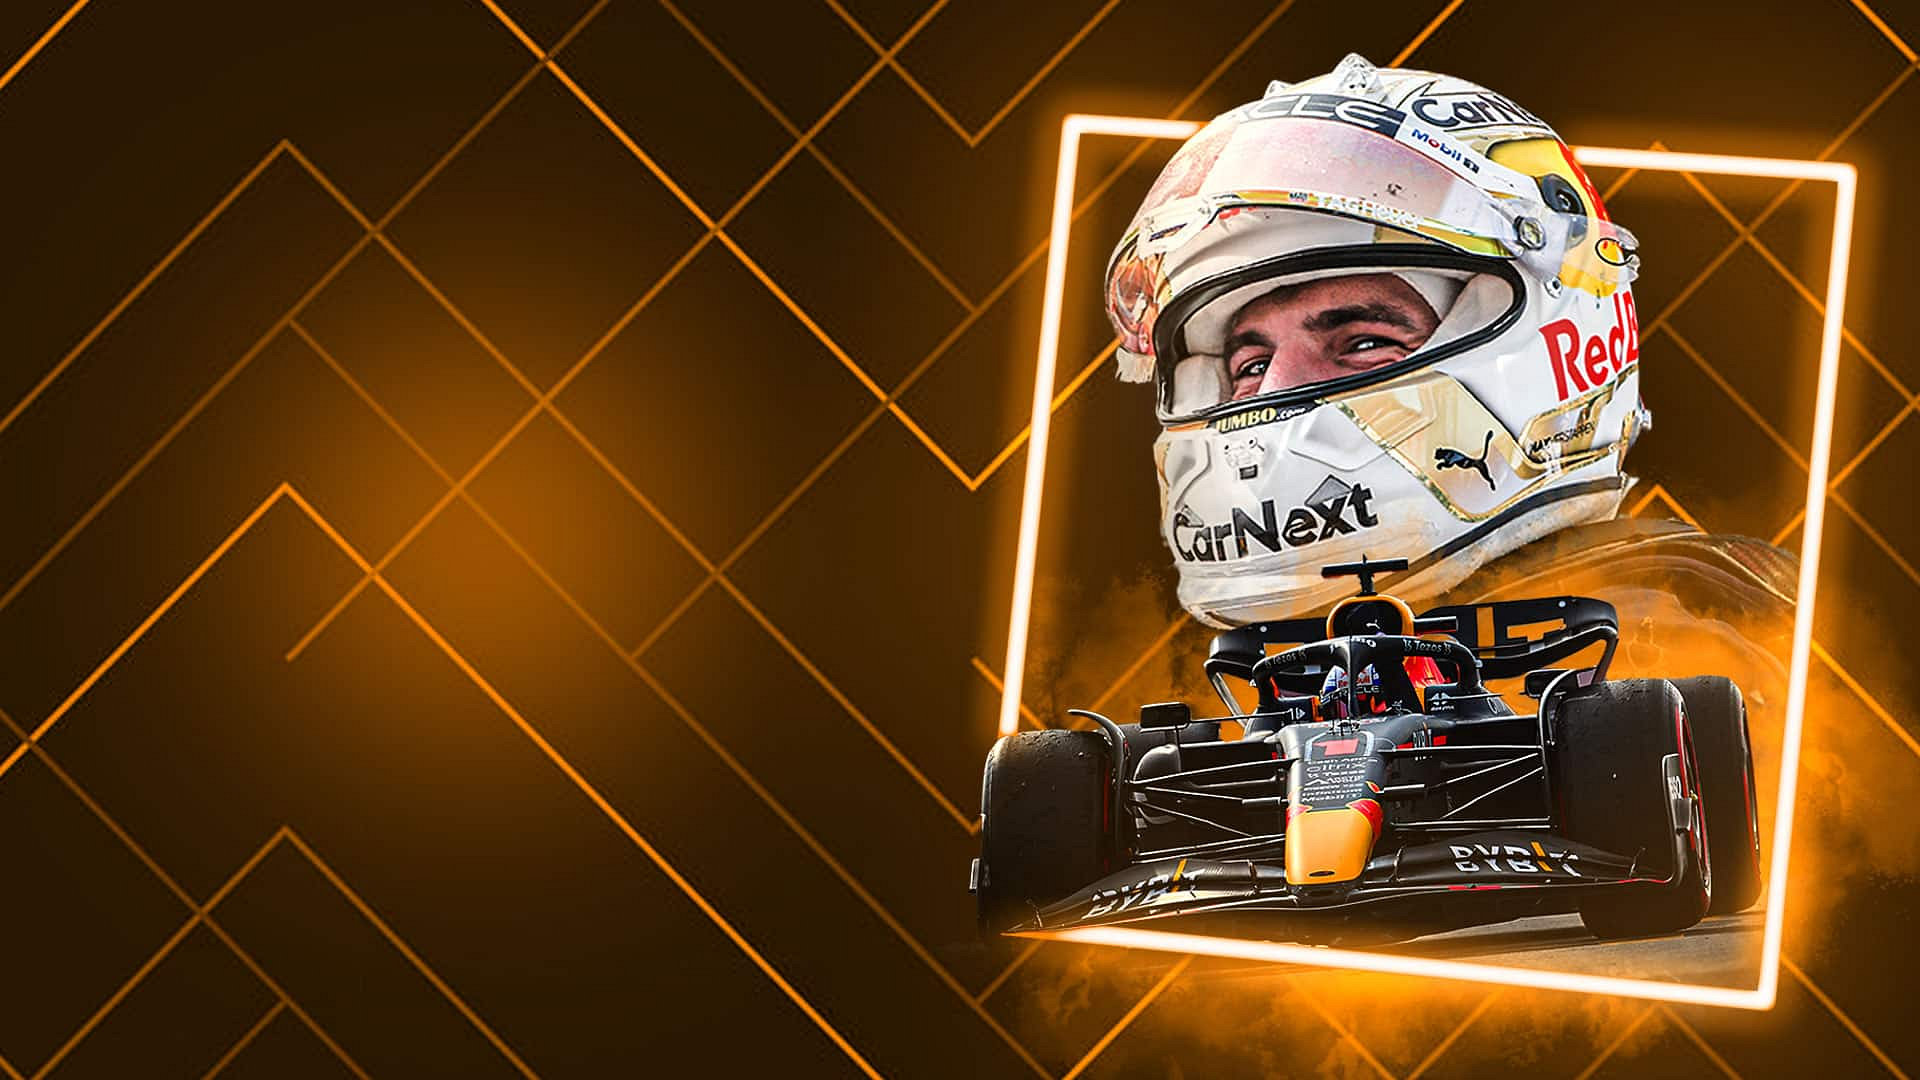 Max Verstappen: Picture Perfect